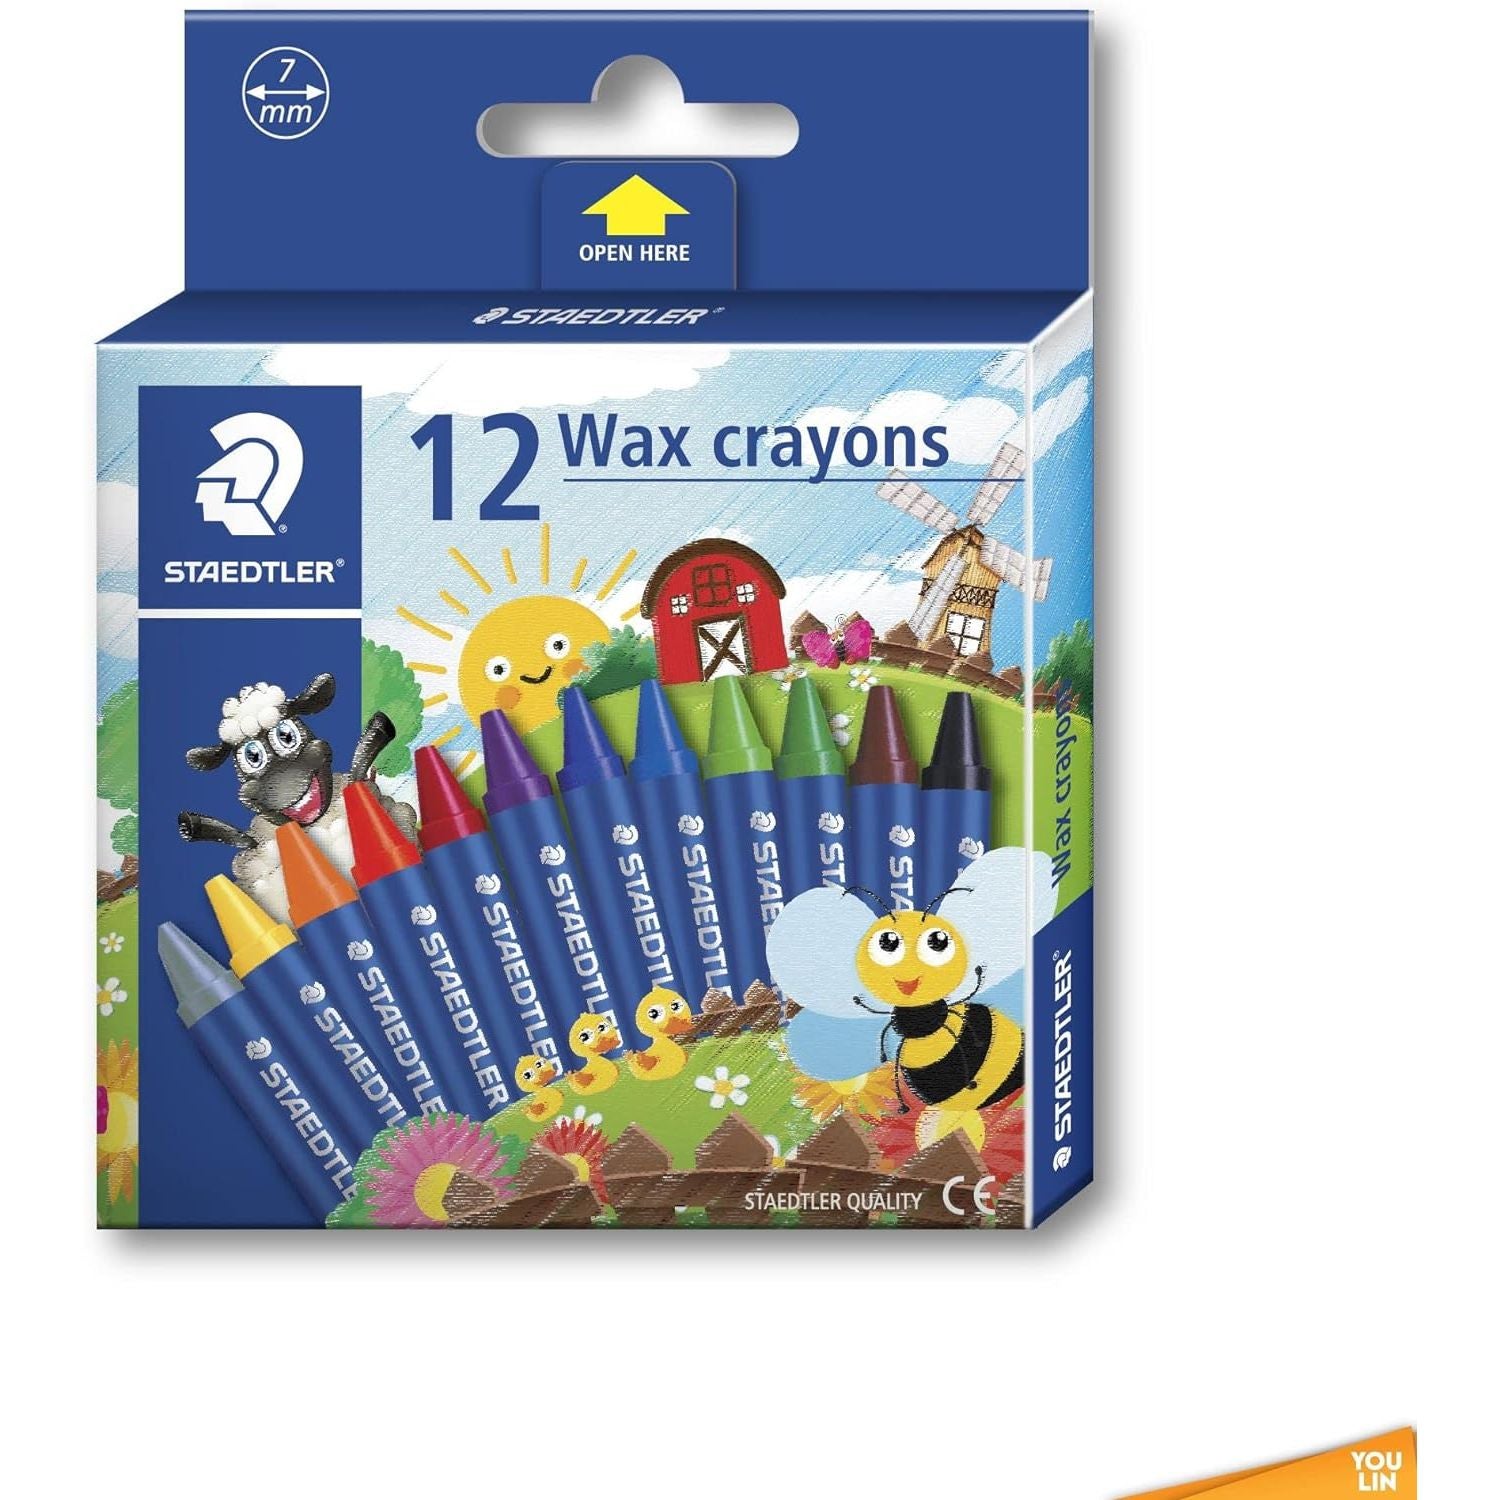 Staedtler 2200 nc12 high quality wax crayons set of 12 pcs. - multi color